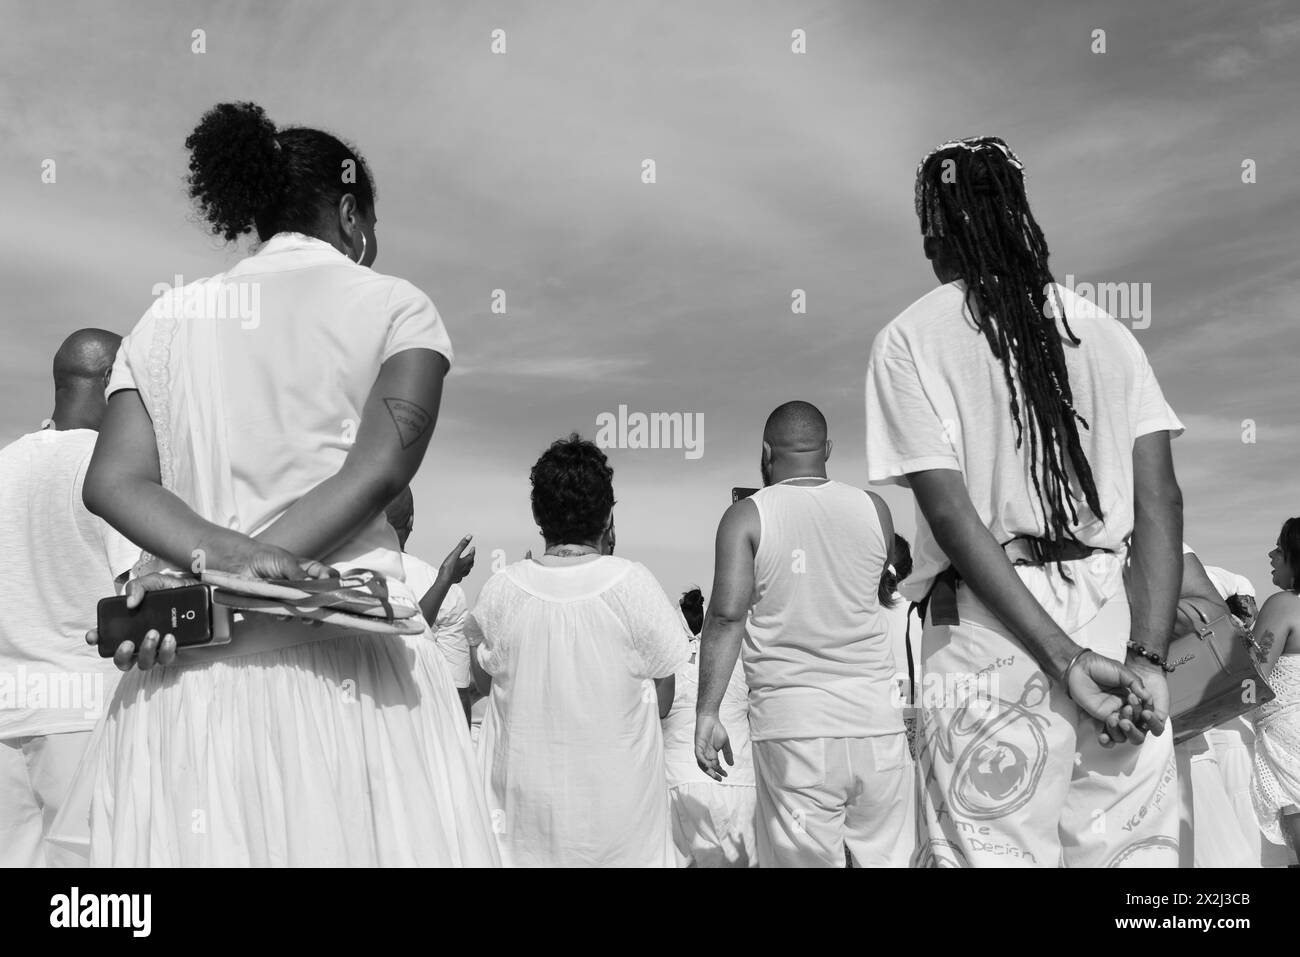 Santo Amaro, Bahia, Brazil - May 19, 2019: Members of Umbanda are seen participating in the tribute to iemanja on Itapema beach in the city of Santo A Stock Photo